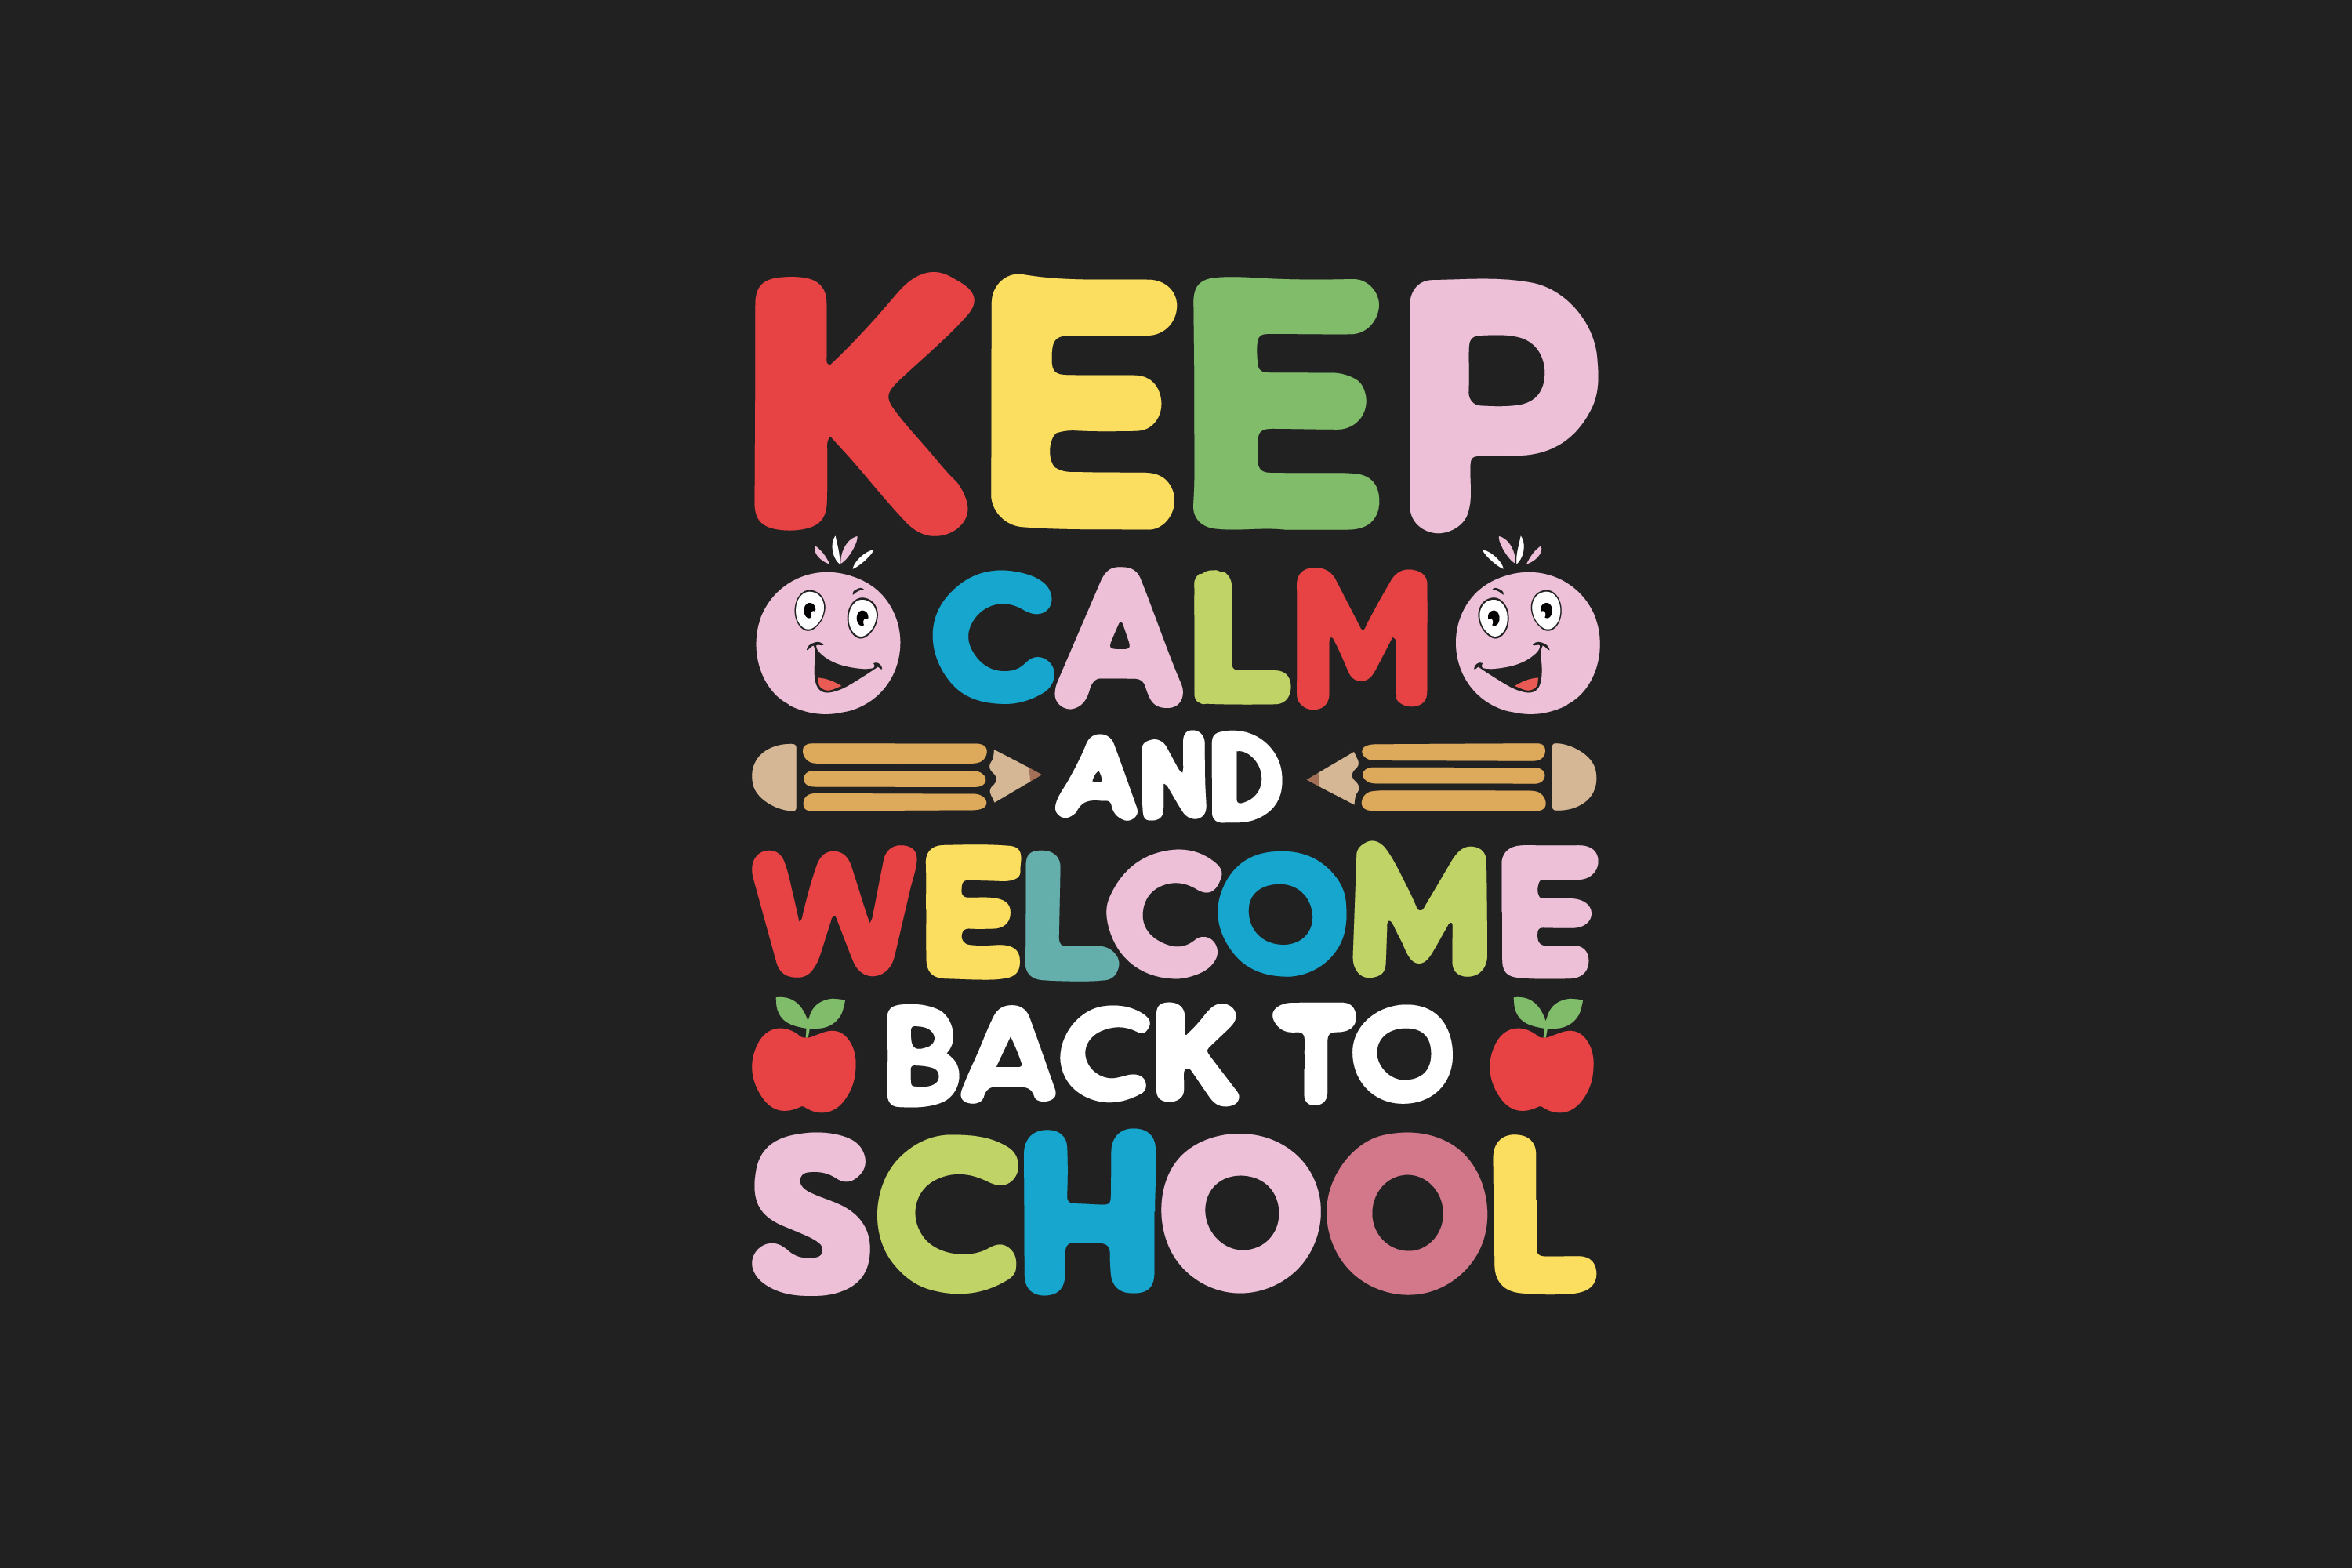 back to school 41 22 140